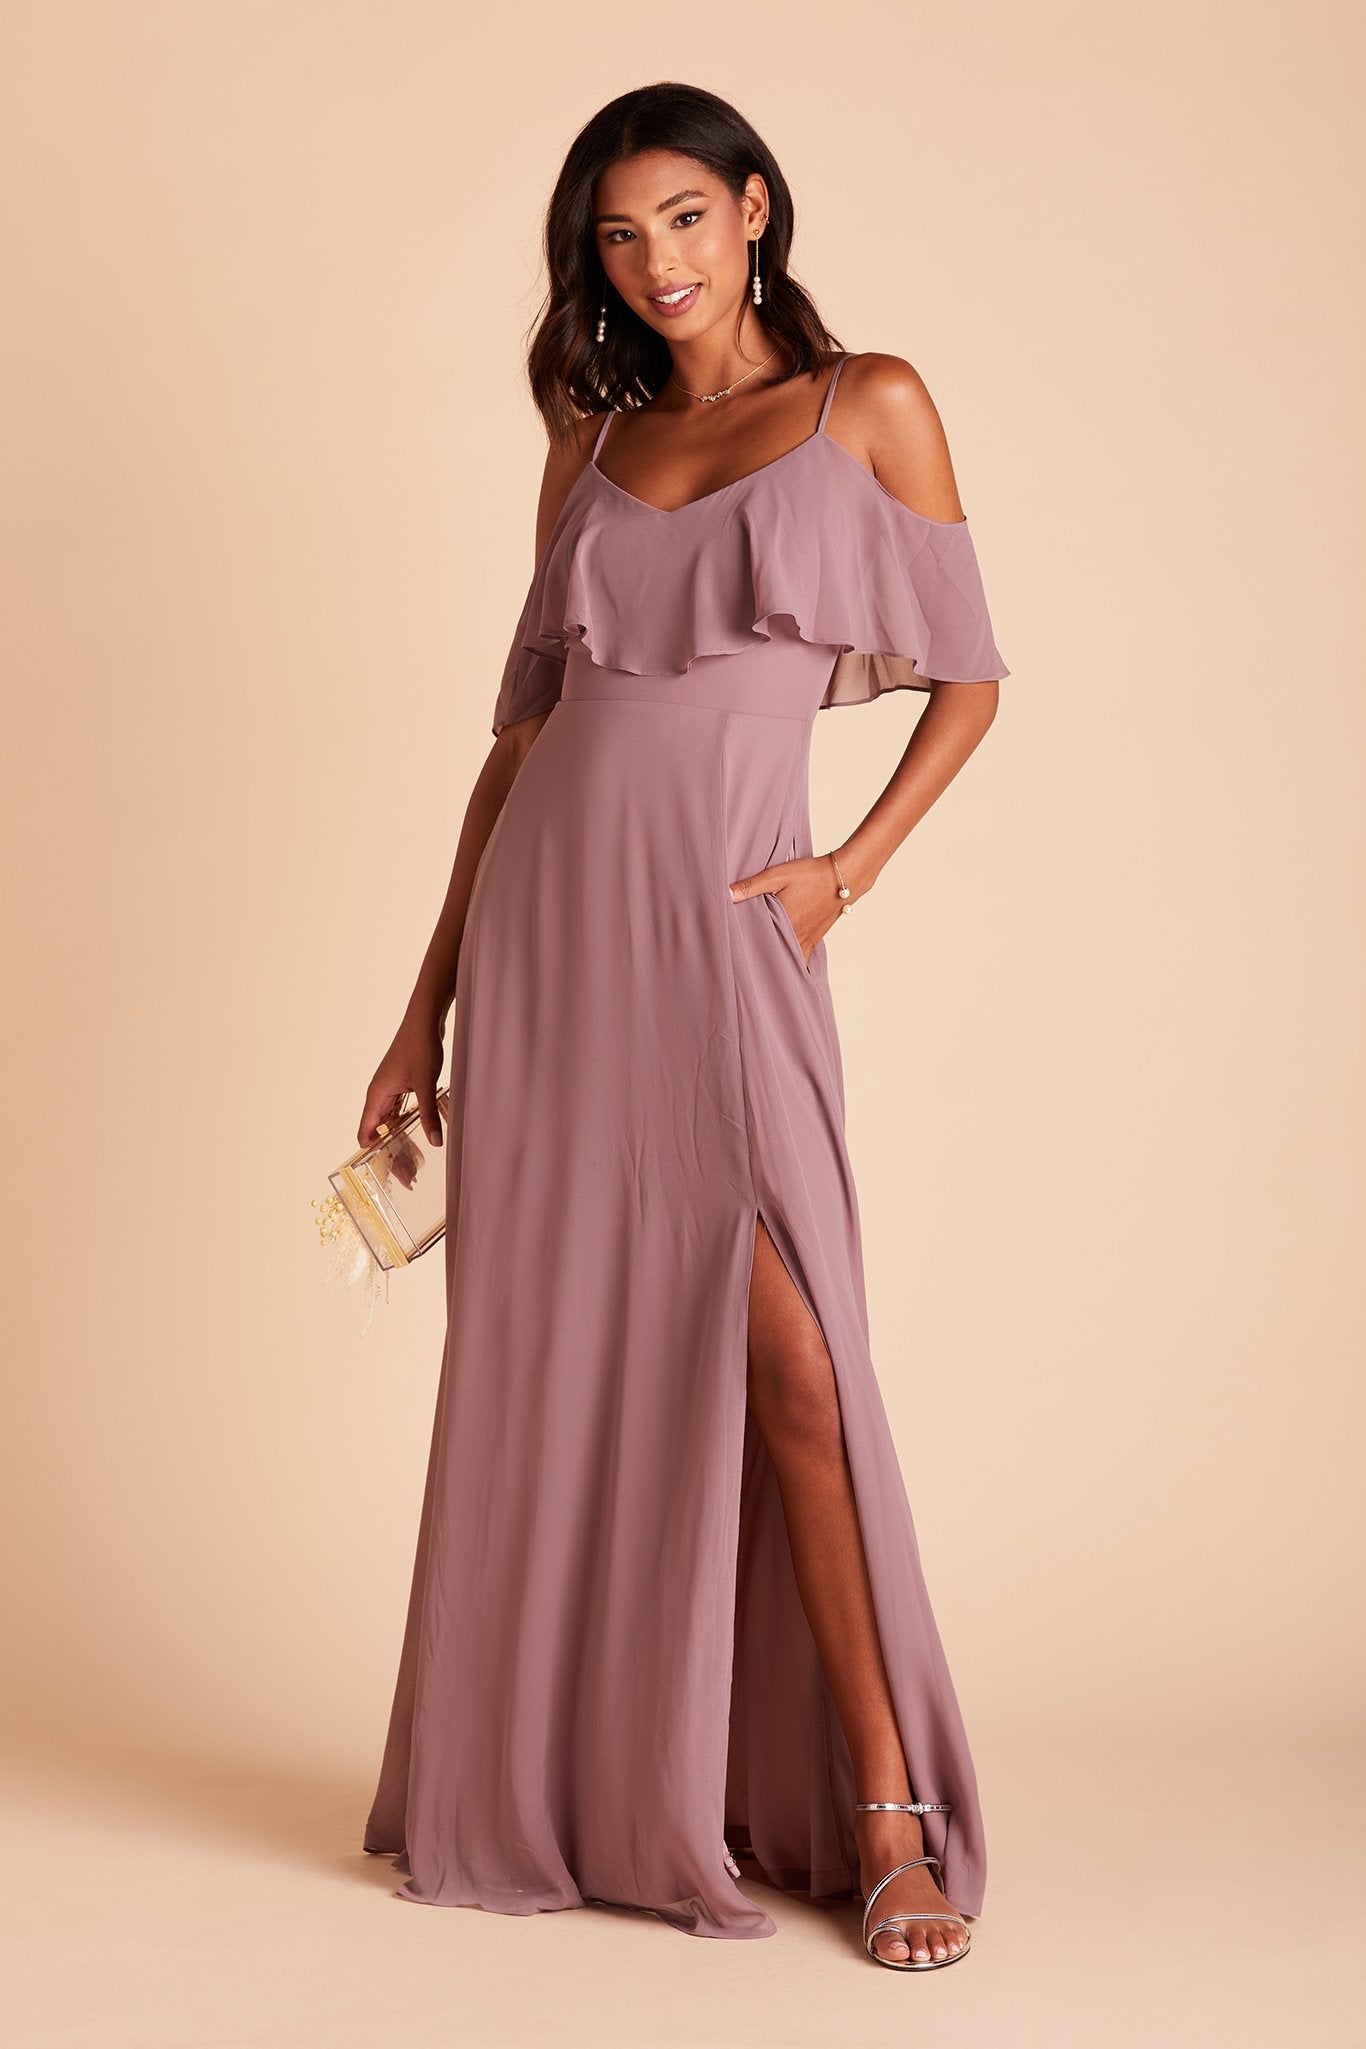 Jane convertible bridesmaid dress in dark mauve chiffon by Birdy Grey, front view with hand in pocket